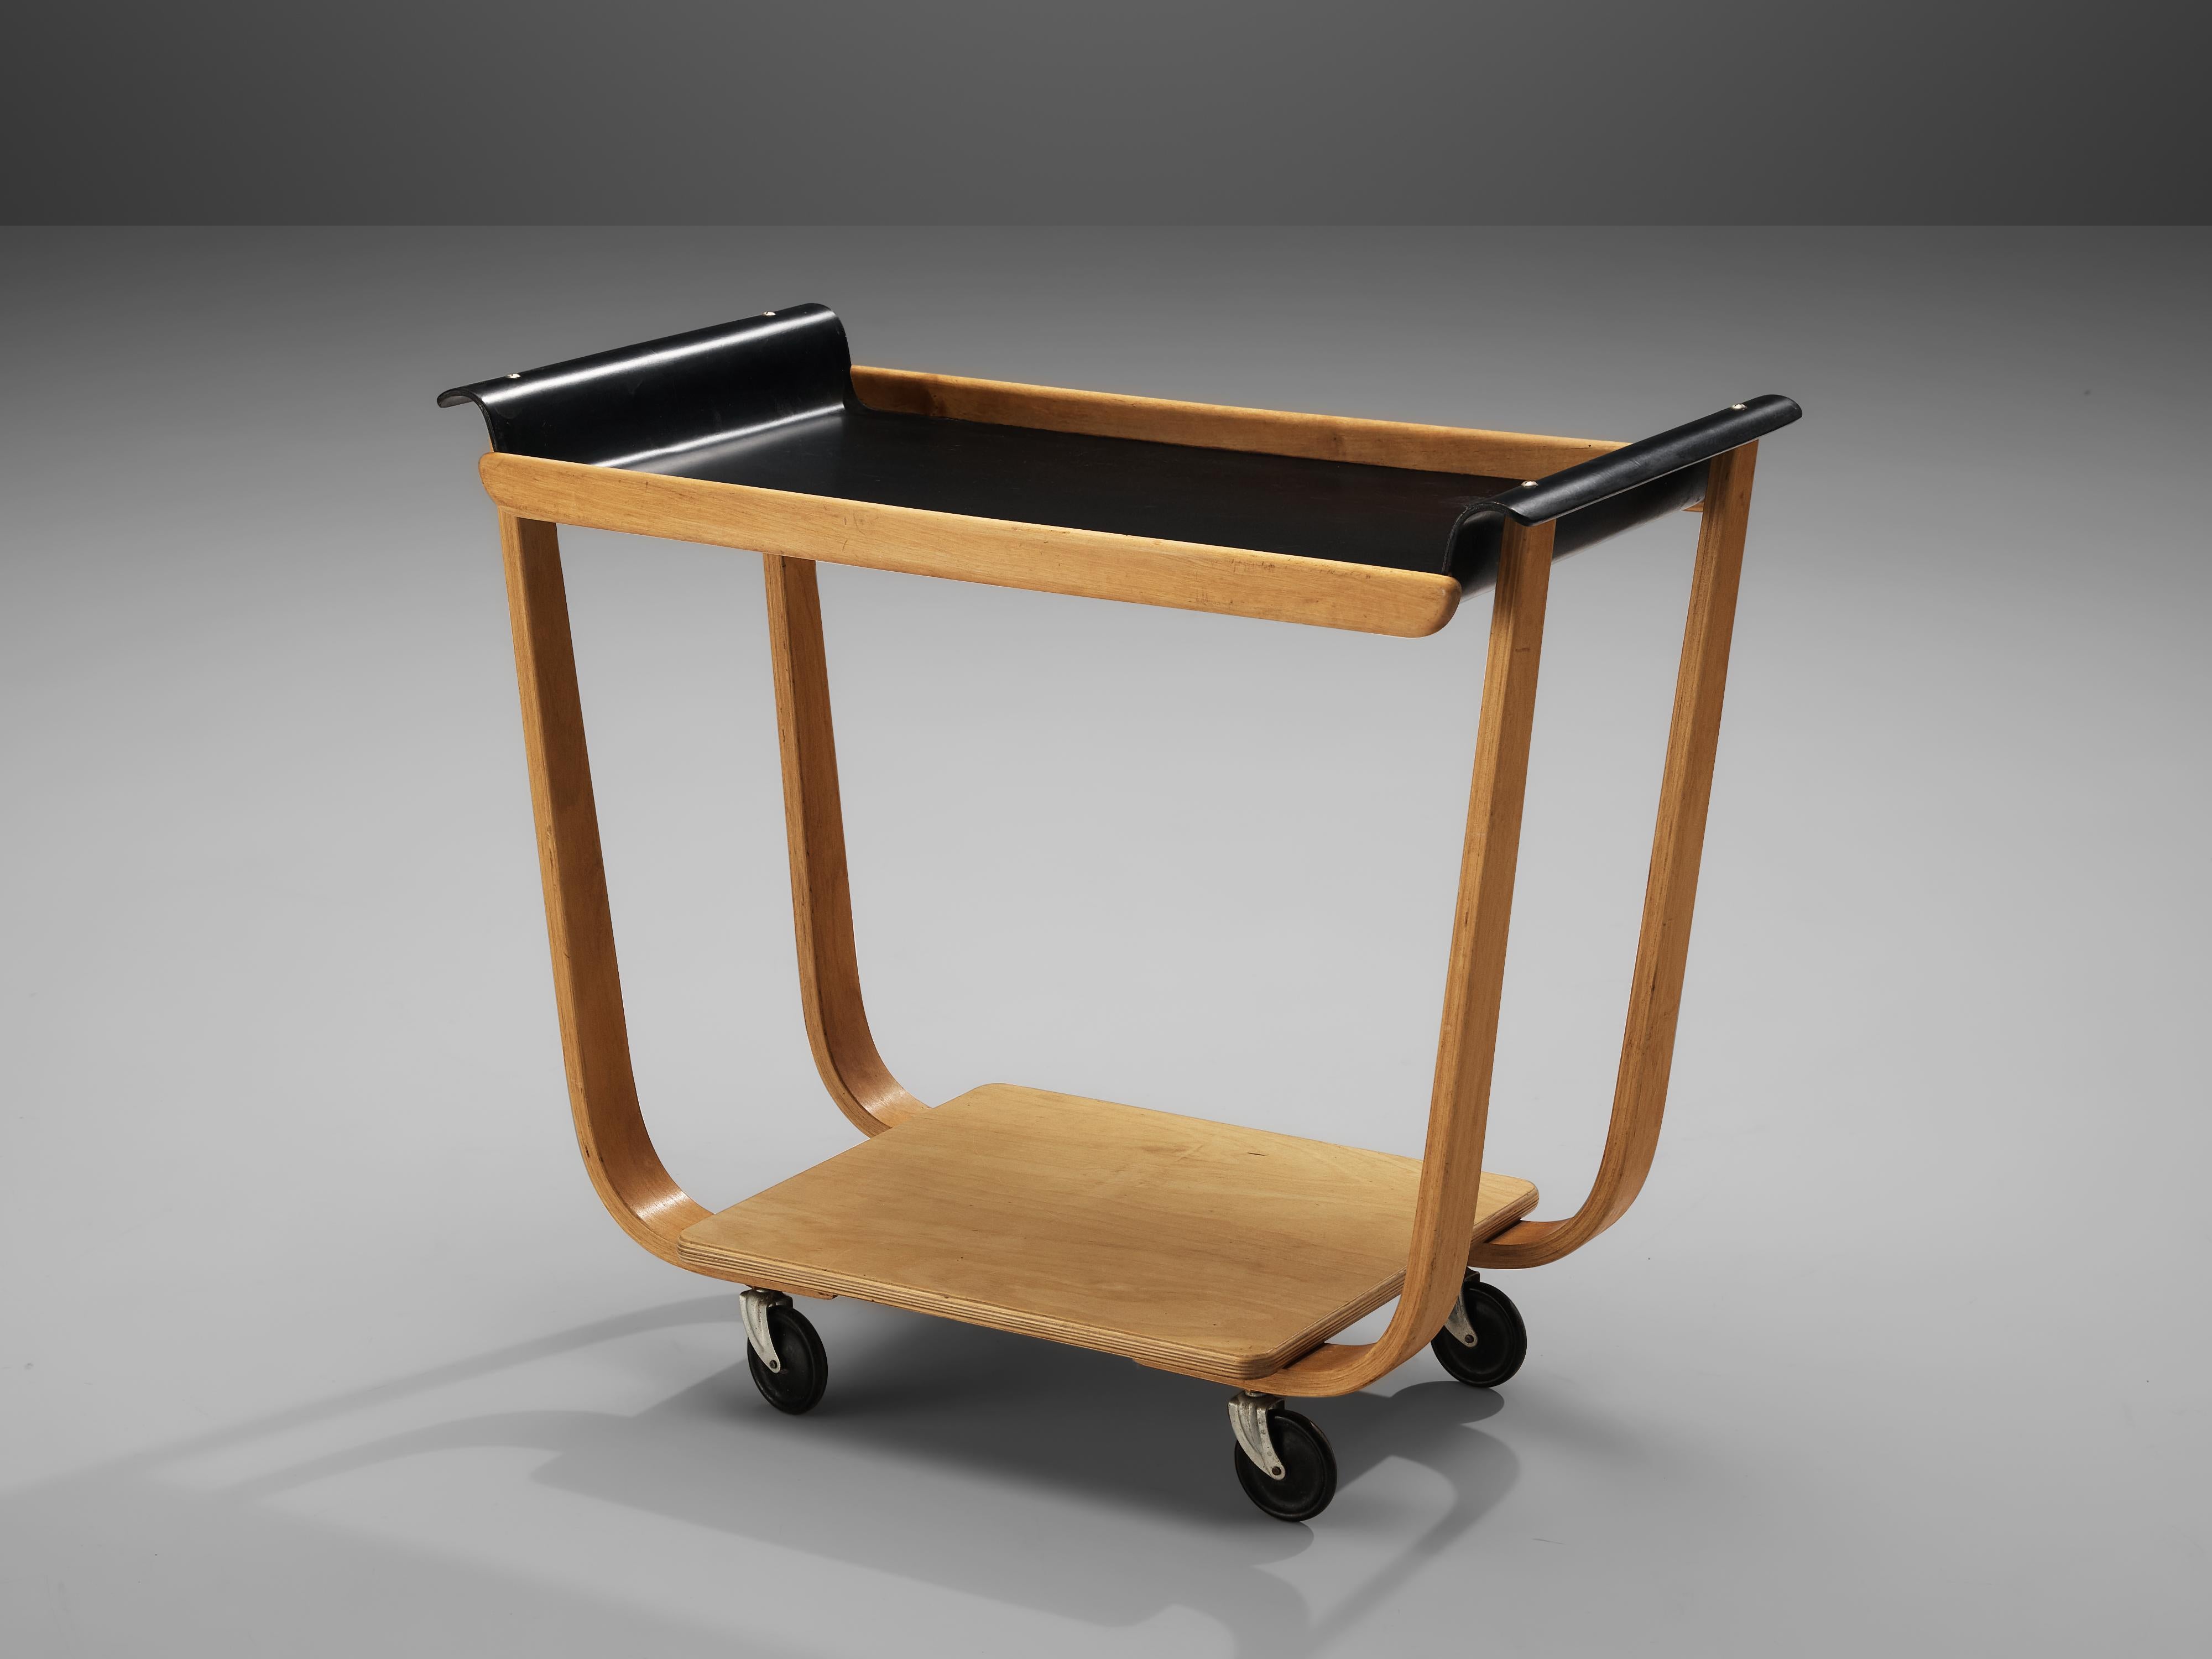 Cees Braakman for Pastoe, serving trolley model ‘Rolo PB31’, laminated plywood, metal, the Netherlands, 1950

Dutch furniture designer Cees Braakman designed the ‘Rolo’ serving trolley for Pastoe in 1950. Braakman combined the bright color of the